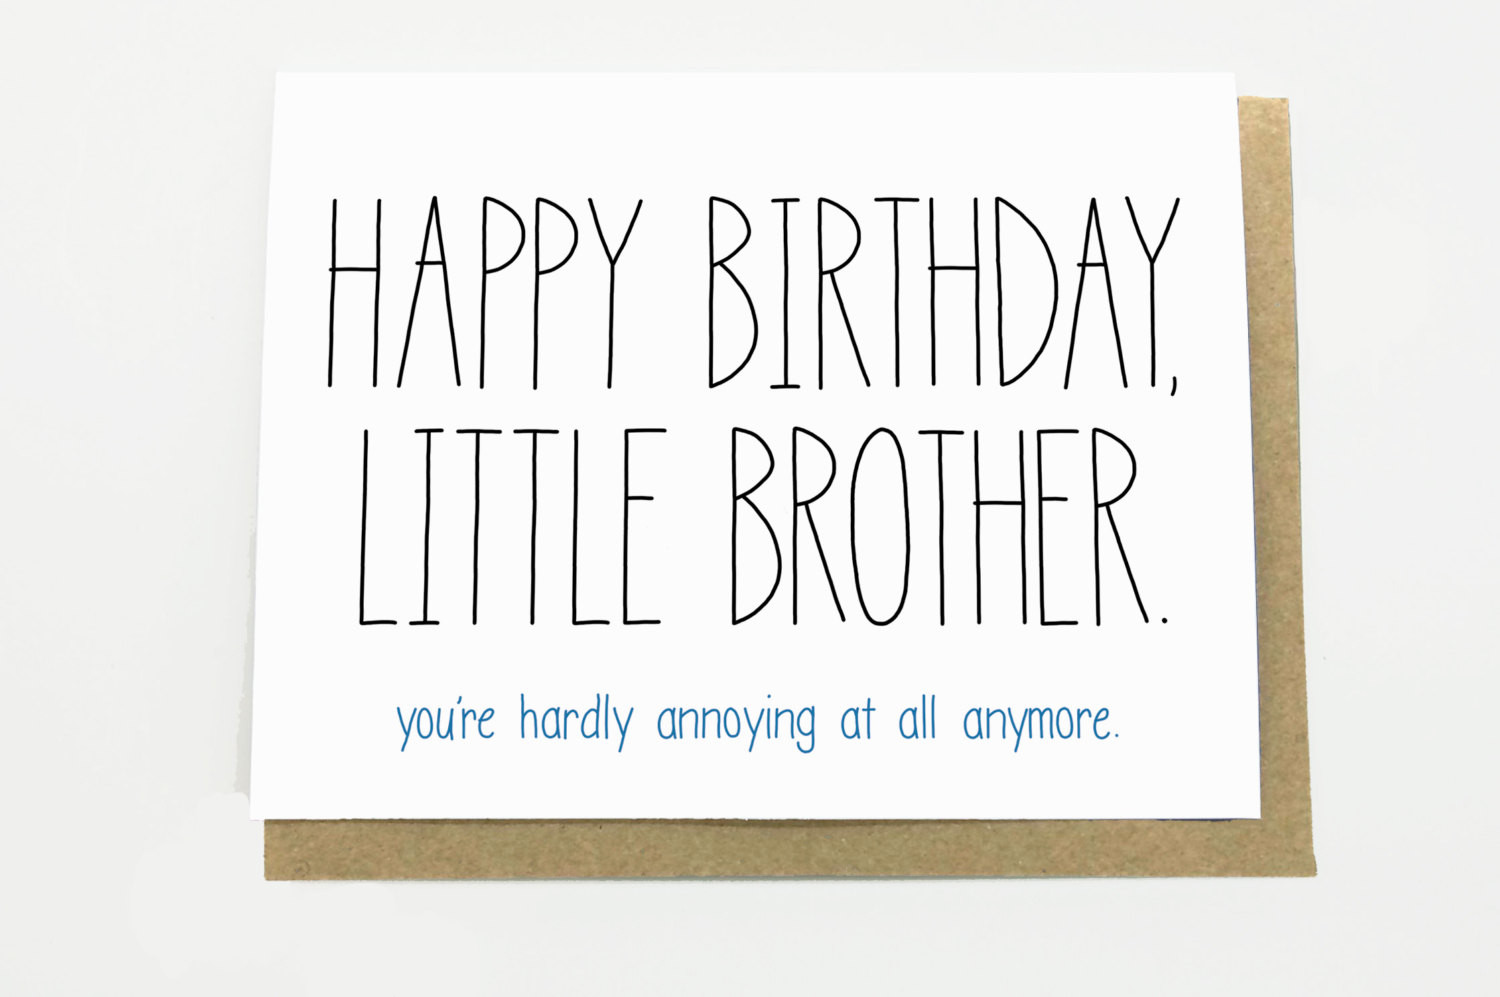 Happy Birthday Lil Brother Quotes
 Funny Birthday Card Little Brother You re by CheekyKumquat